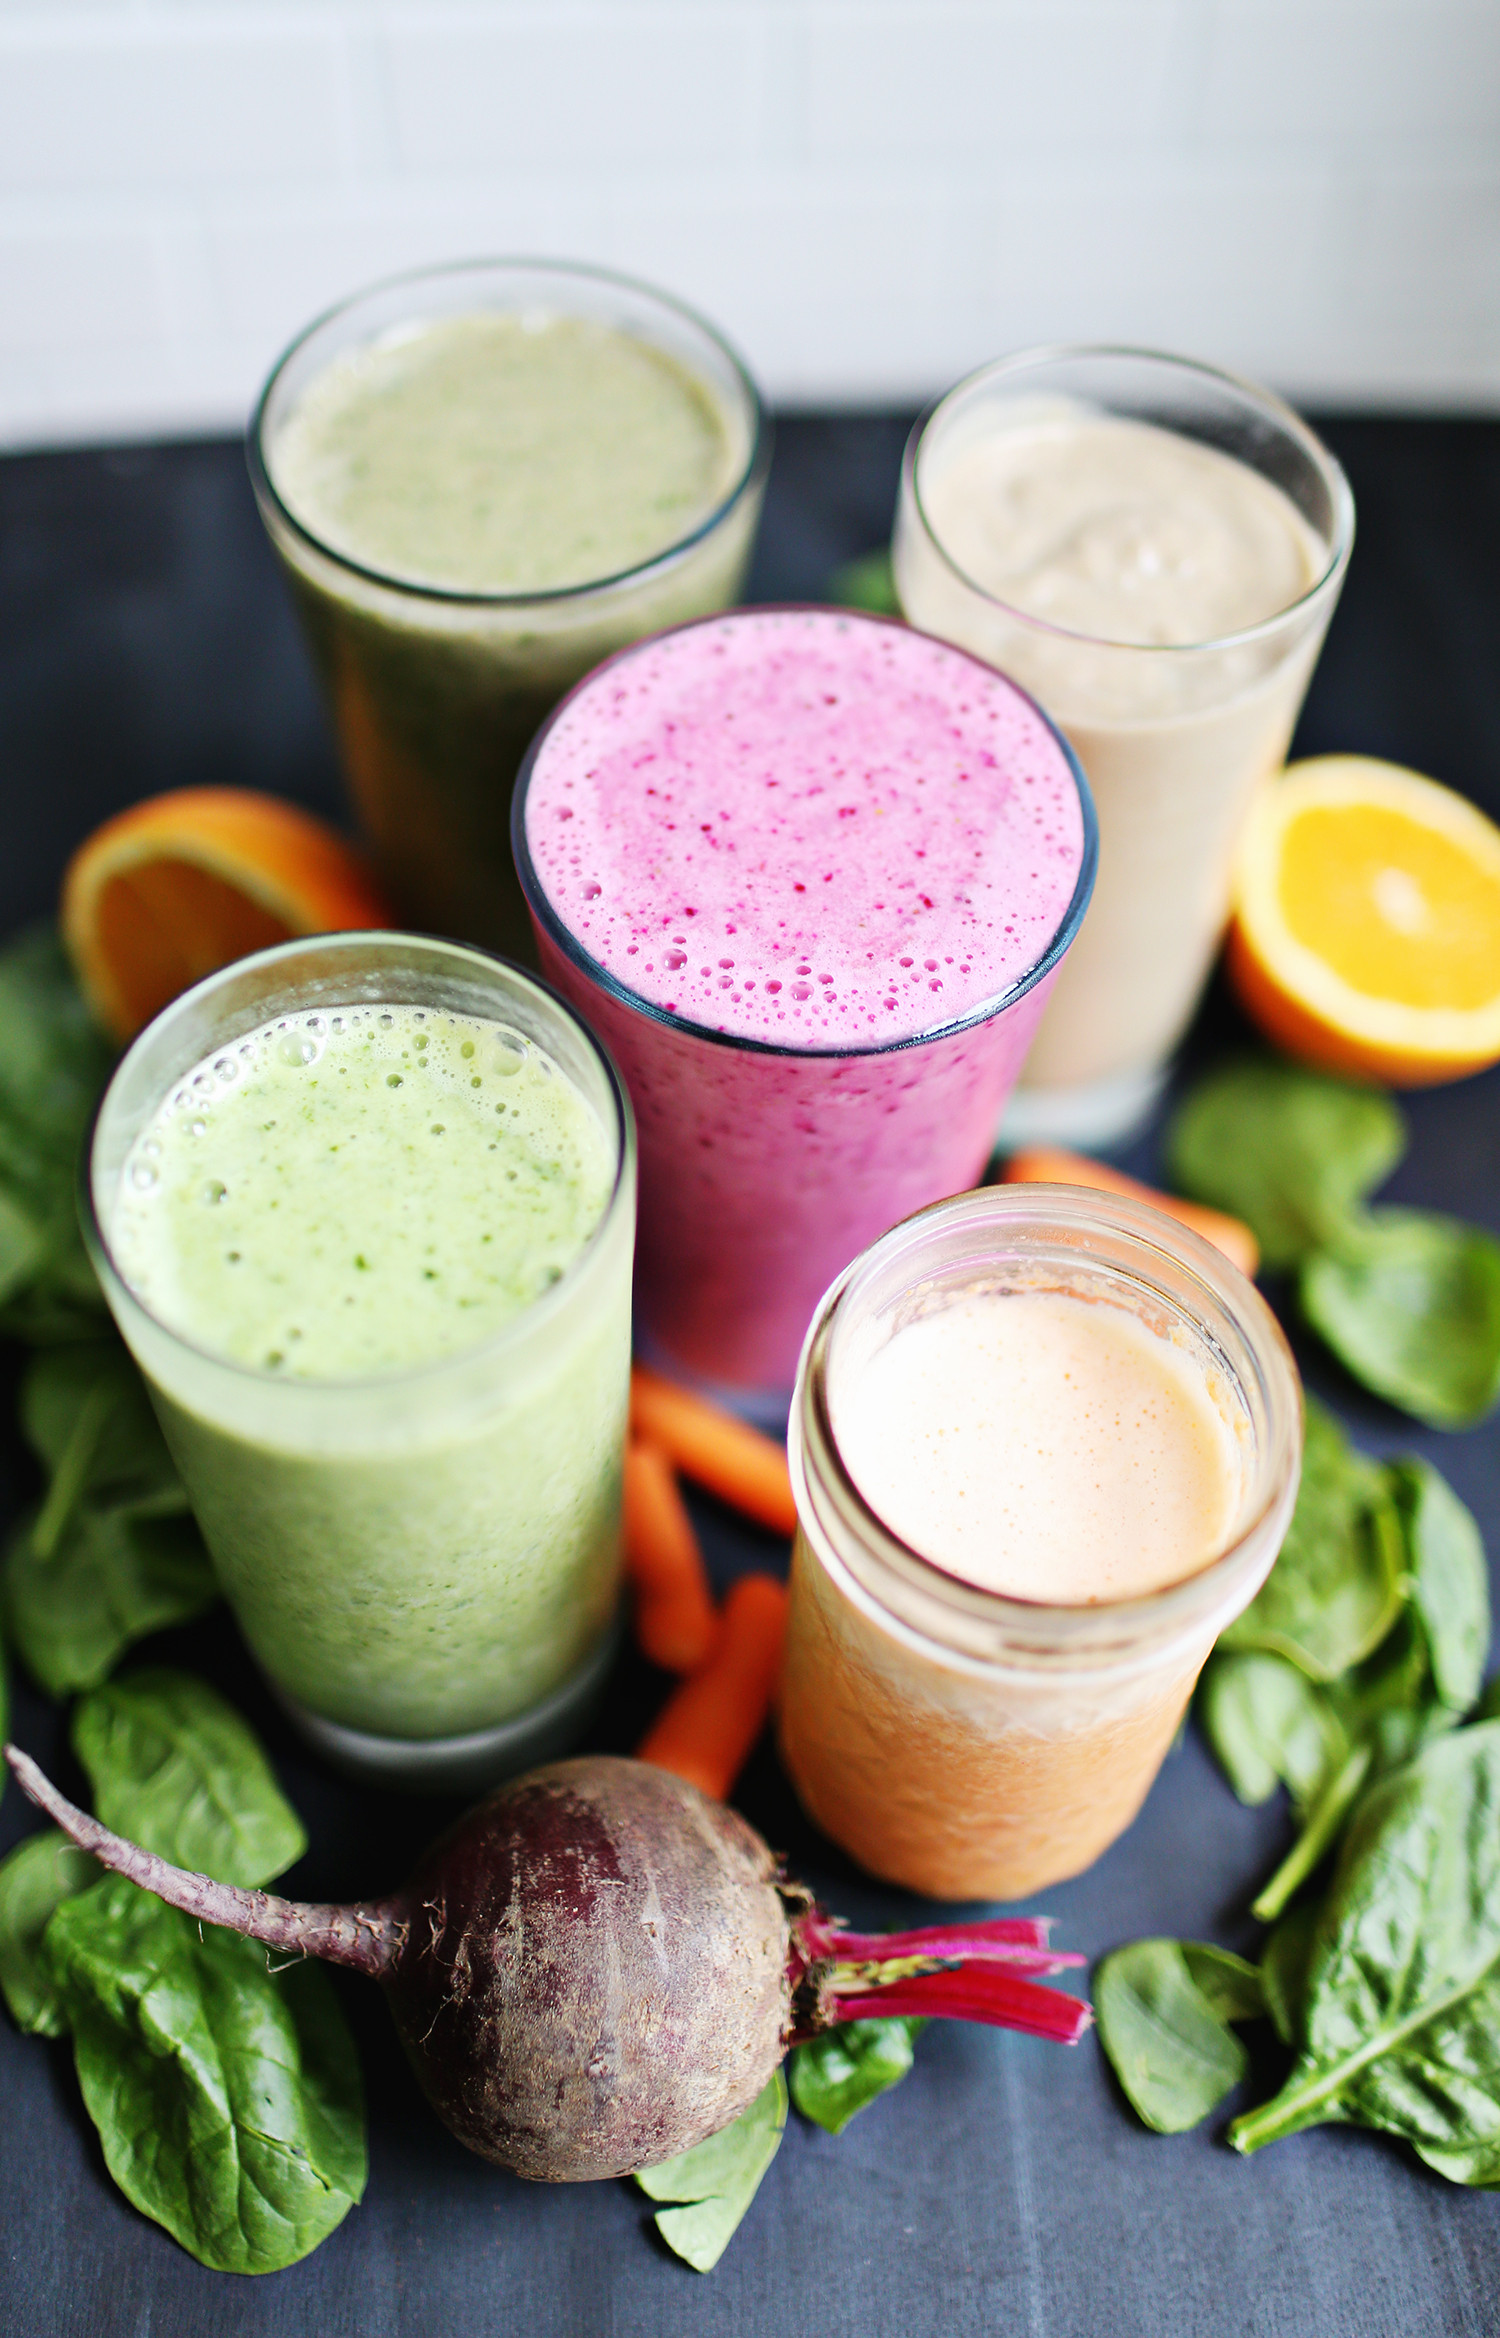 Breakfast Smoothies Healthy the 20 Best Ideas for 5 Veggie Based Breakfast Smoothies A Beautiful Mess